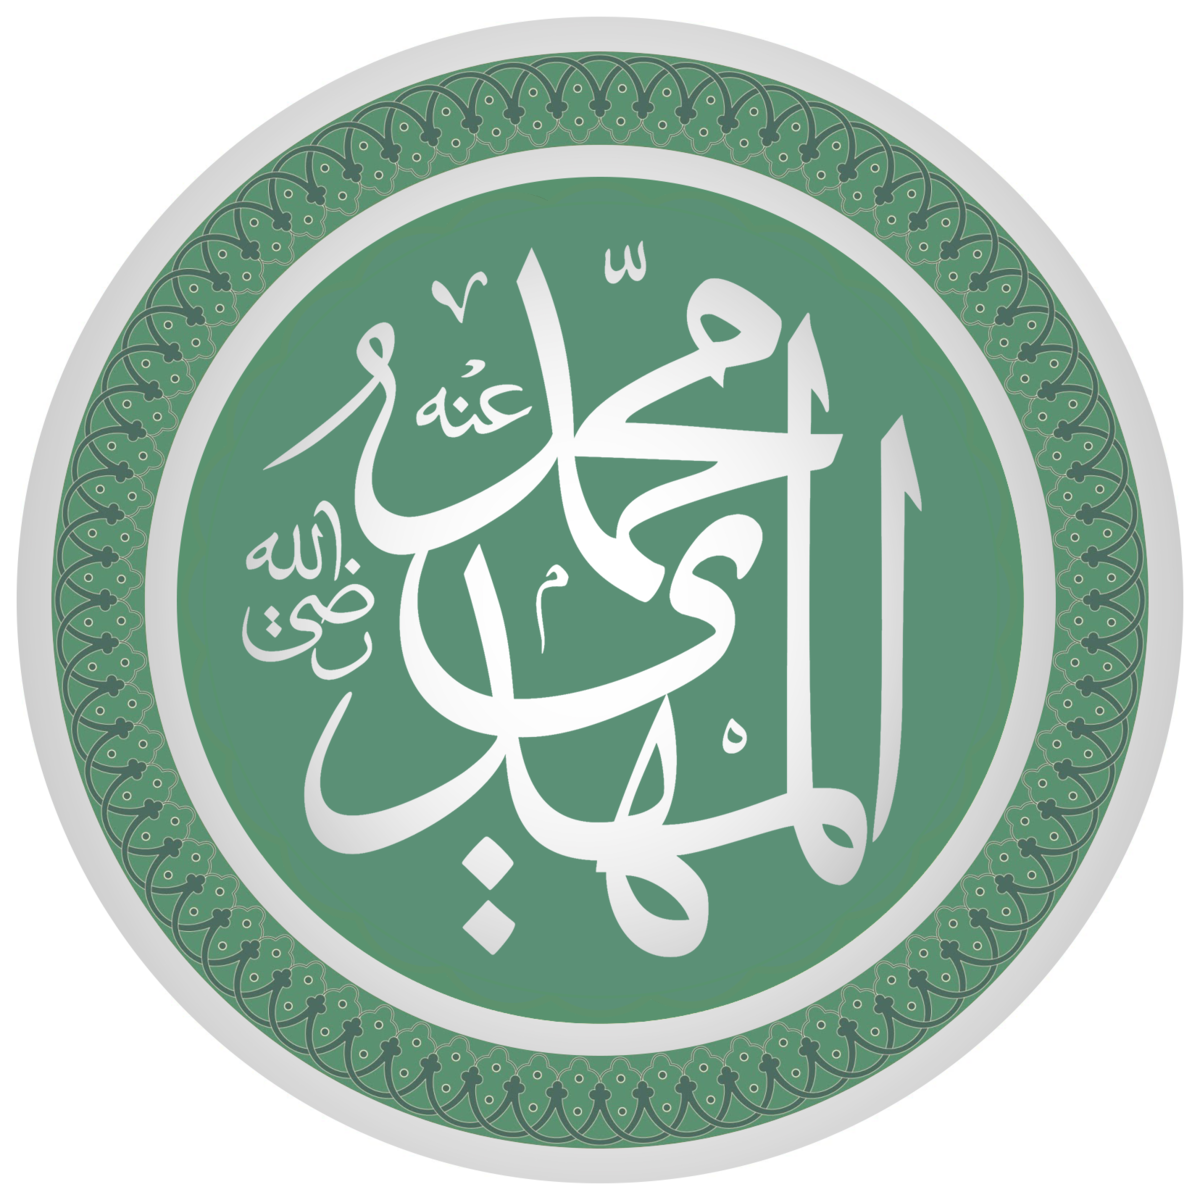 A Green And White Circular Object With White Text